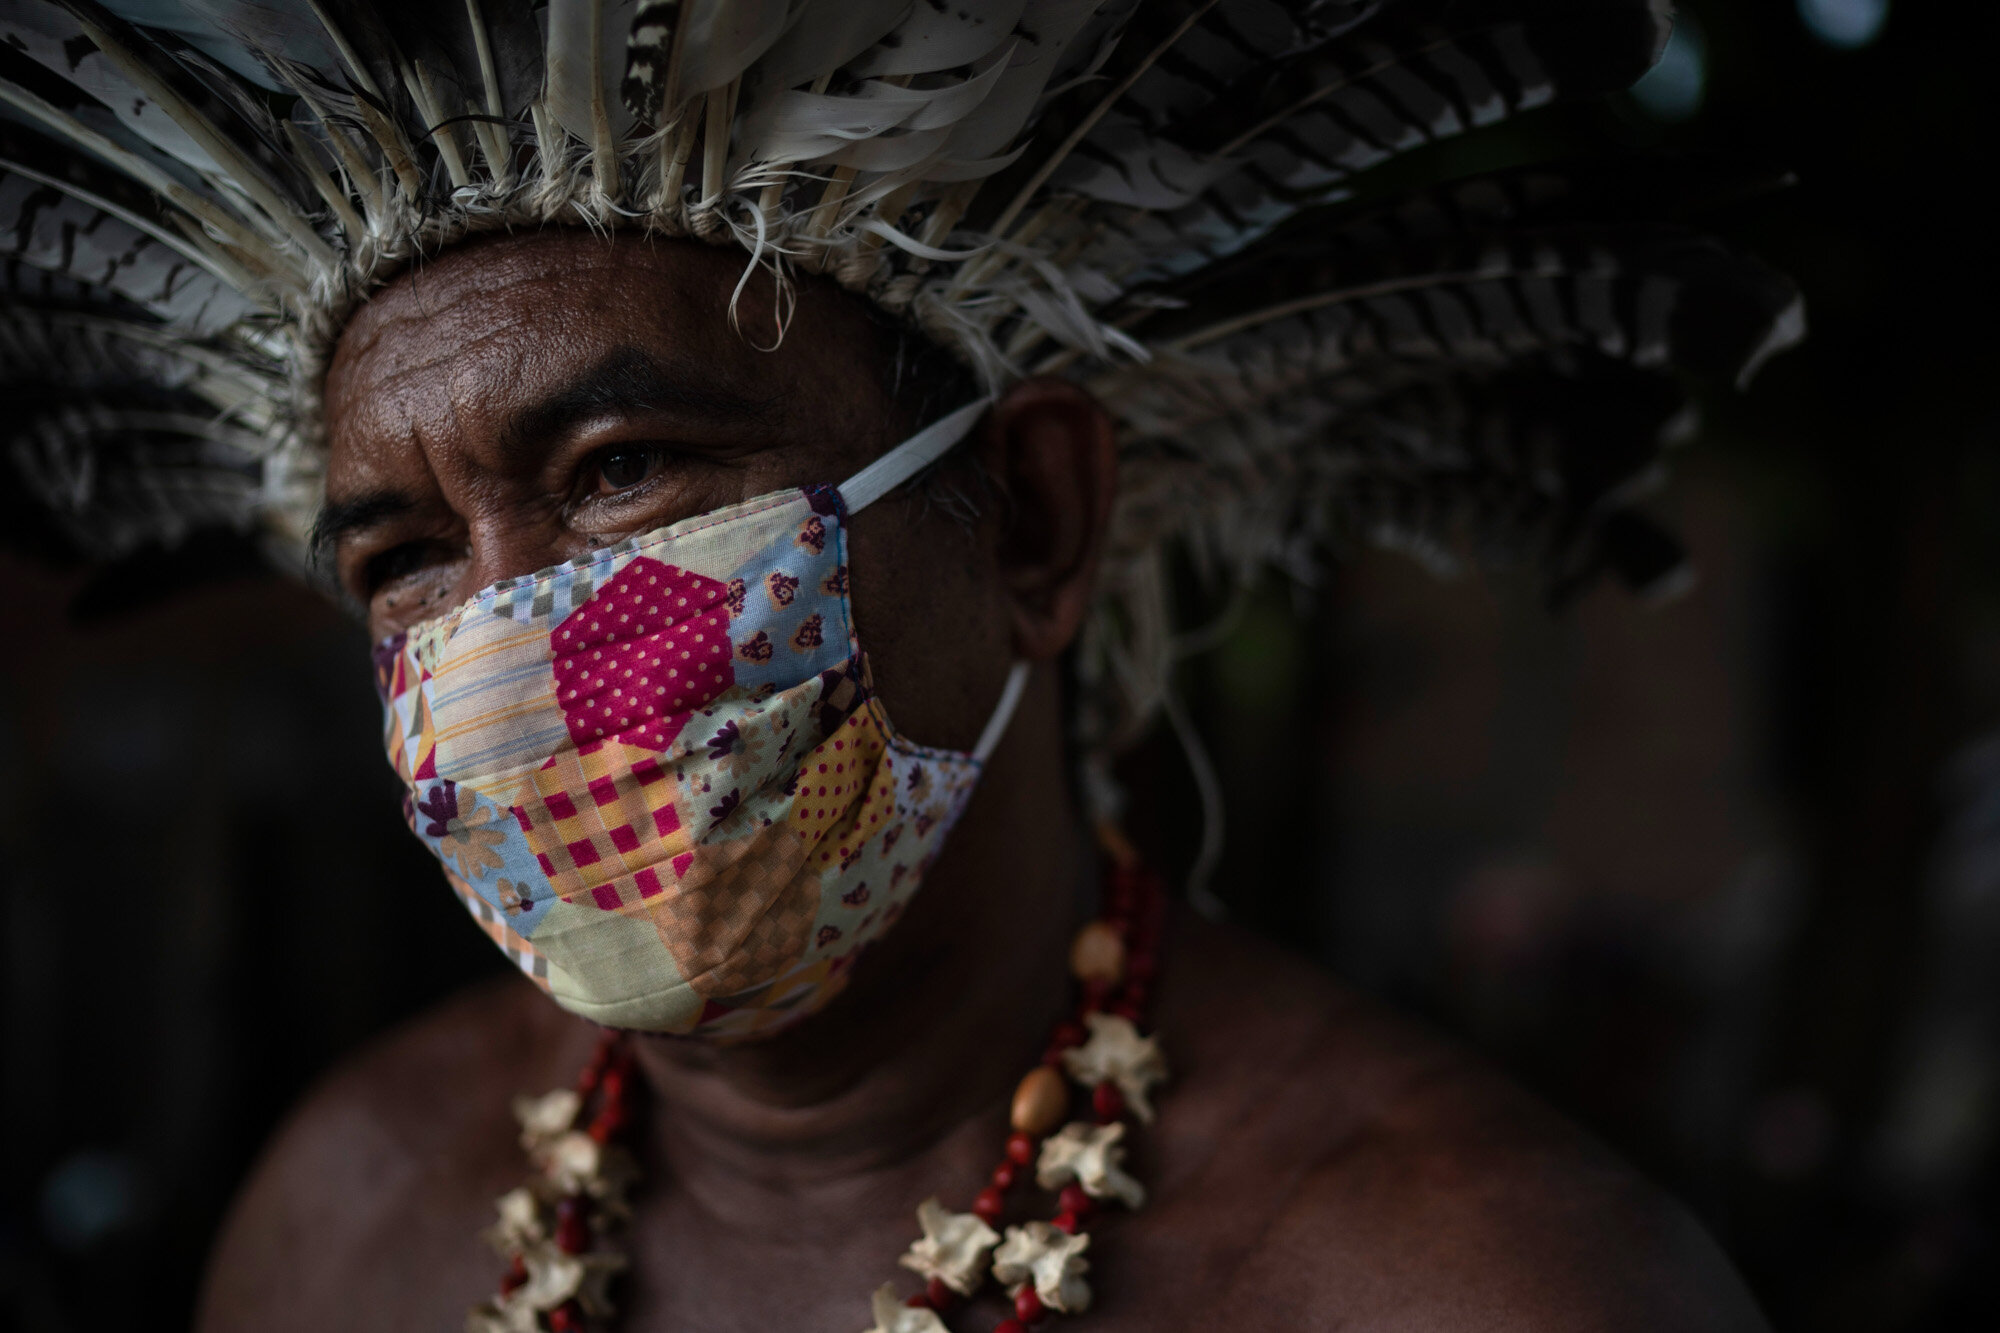  Cacique Pedro poses for a photo as he sits outside his house in the “Park of Indigenous Nations” community in Manaus, Brazil, on May 10, 2020. (AP Photo/Felipe Dana) 